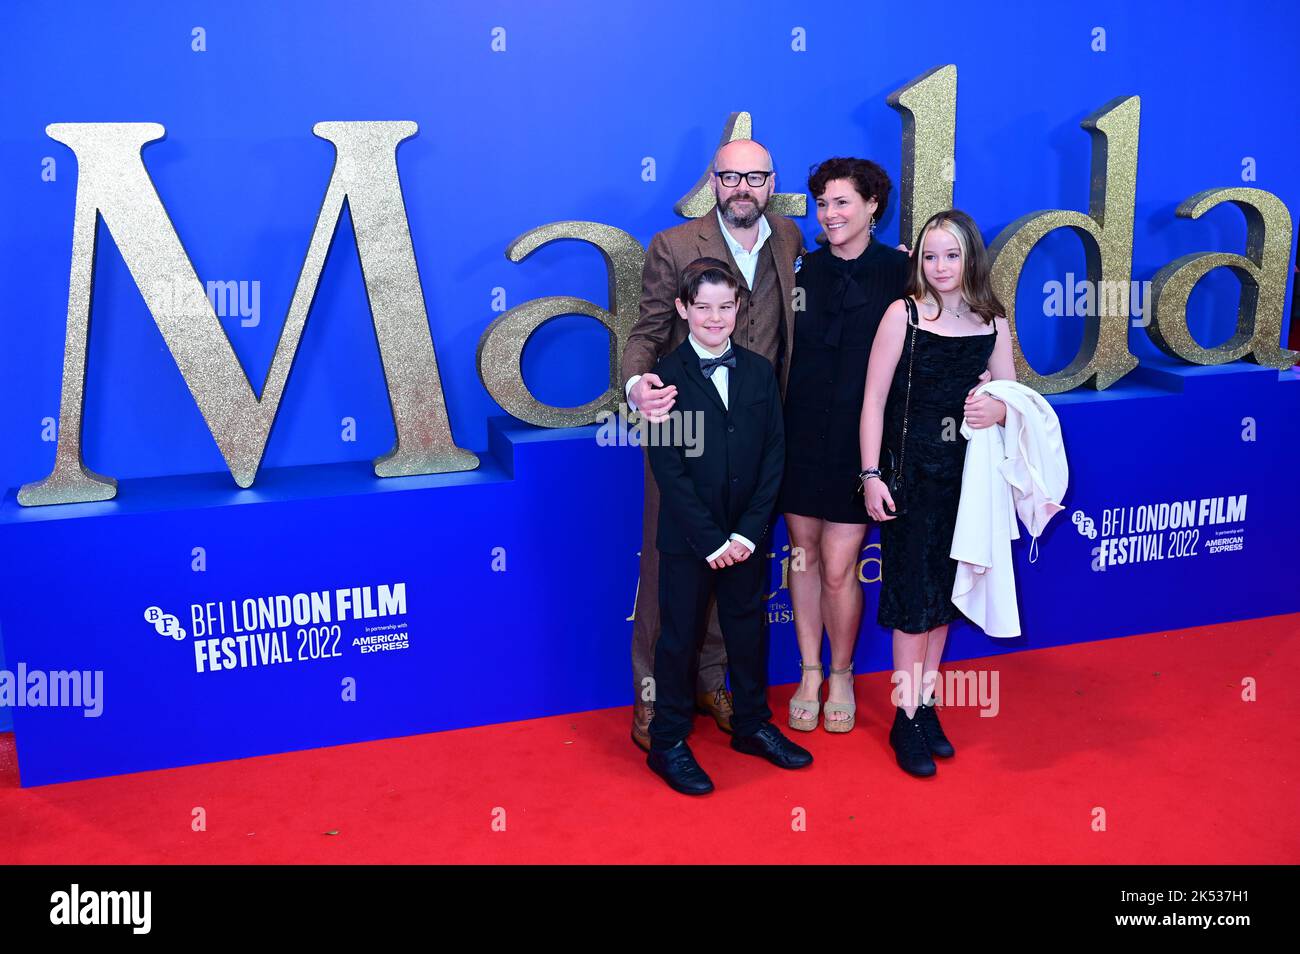 London, UK , 05/10/2022, Dennis Kelly and family Arrive at the Cast and filmmakers attend the BFI London Film Festival press conference for Roald Dahl’s Matilda The Musical, released by Sony Pictures in cinemas across the UK & Ireland on November 25th -  5th October 2022, London, UK. Stock Photo